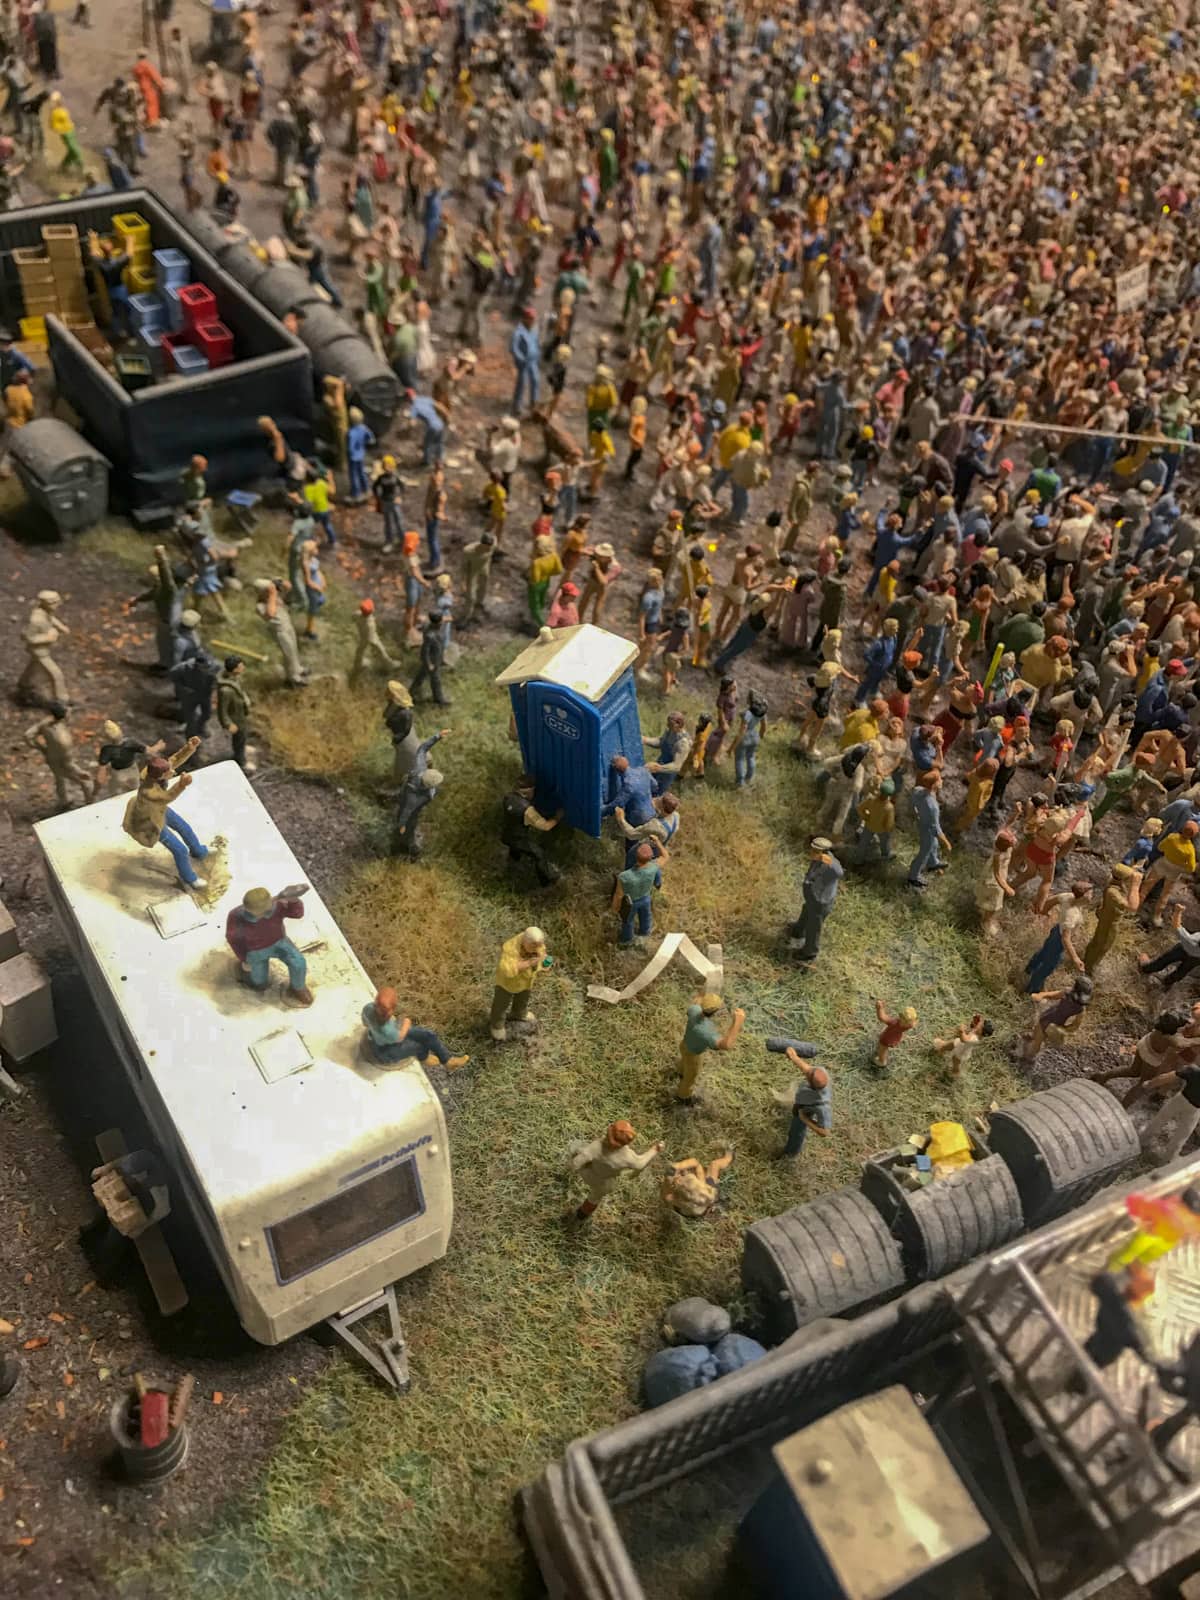 Miniature figurines assembled in a crowd like a festival crowd. There are some figurines carrying a portable toilet